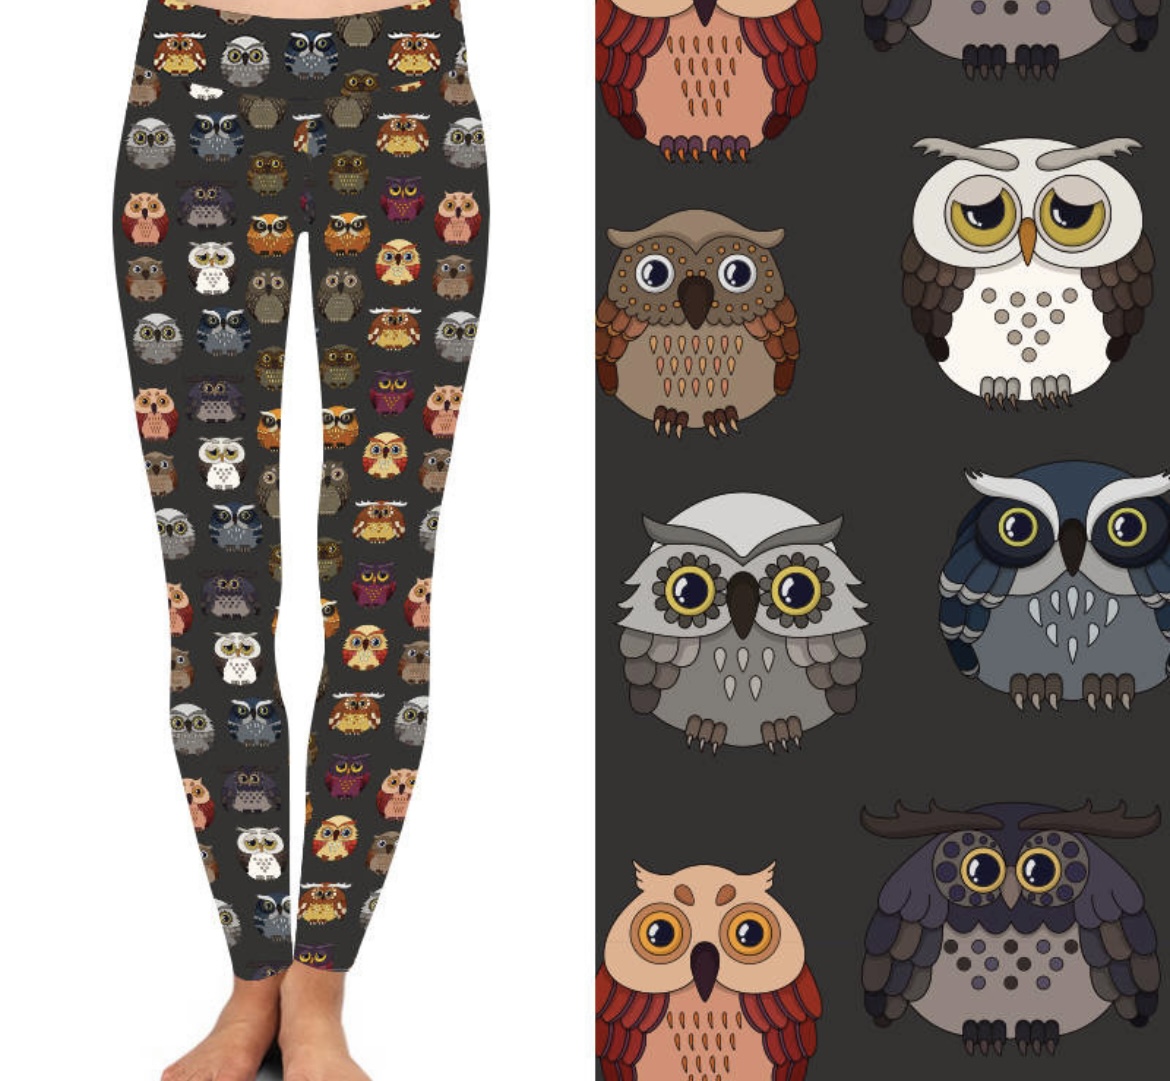 Hooter Plus Leggings with Pockets